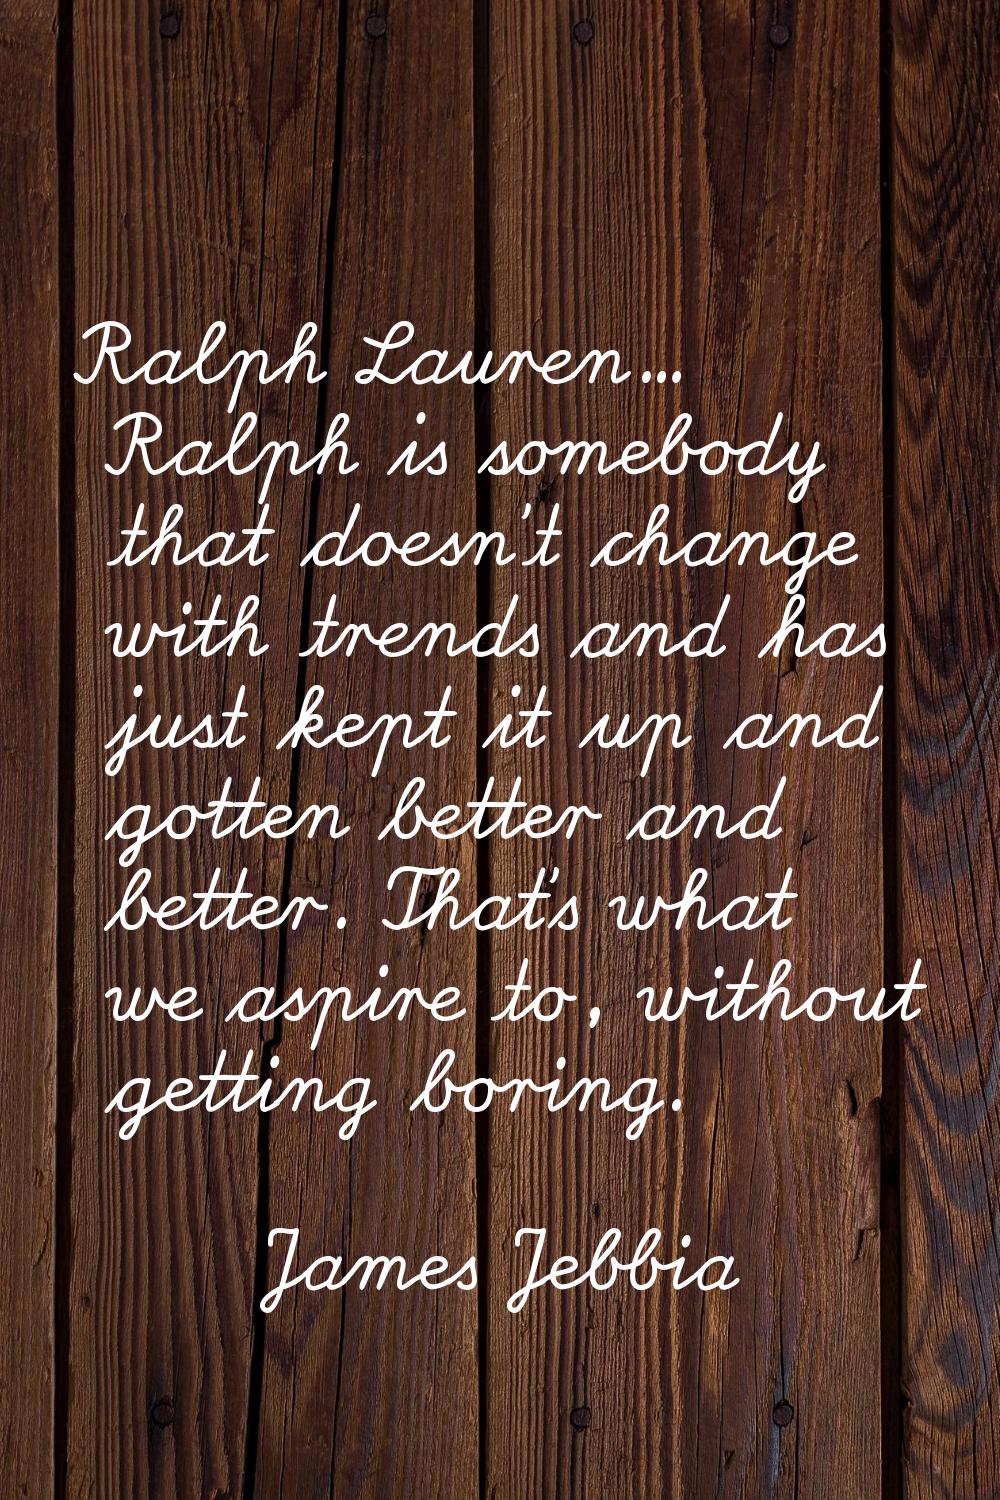 Ralph Lauren... Ralph is somebody that doesn't change with trends and has just kept it up and gotte